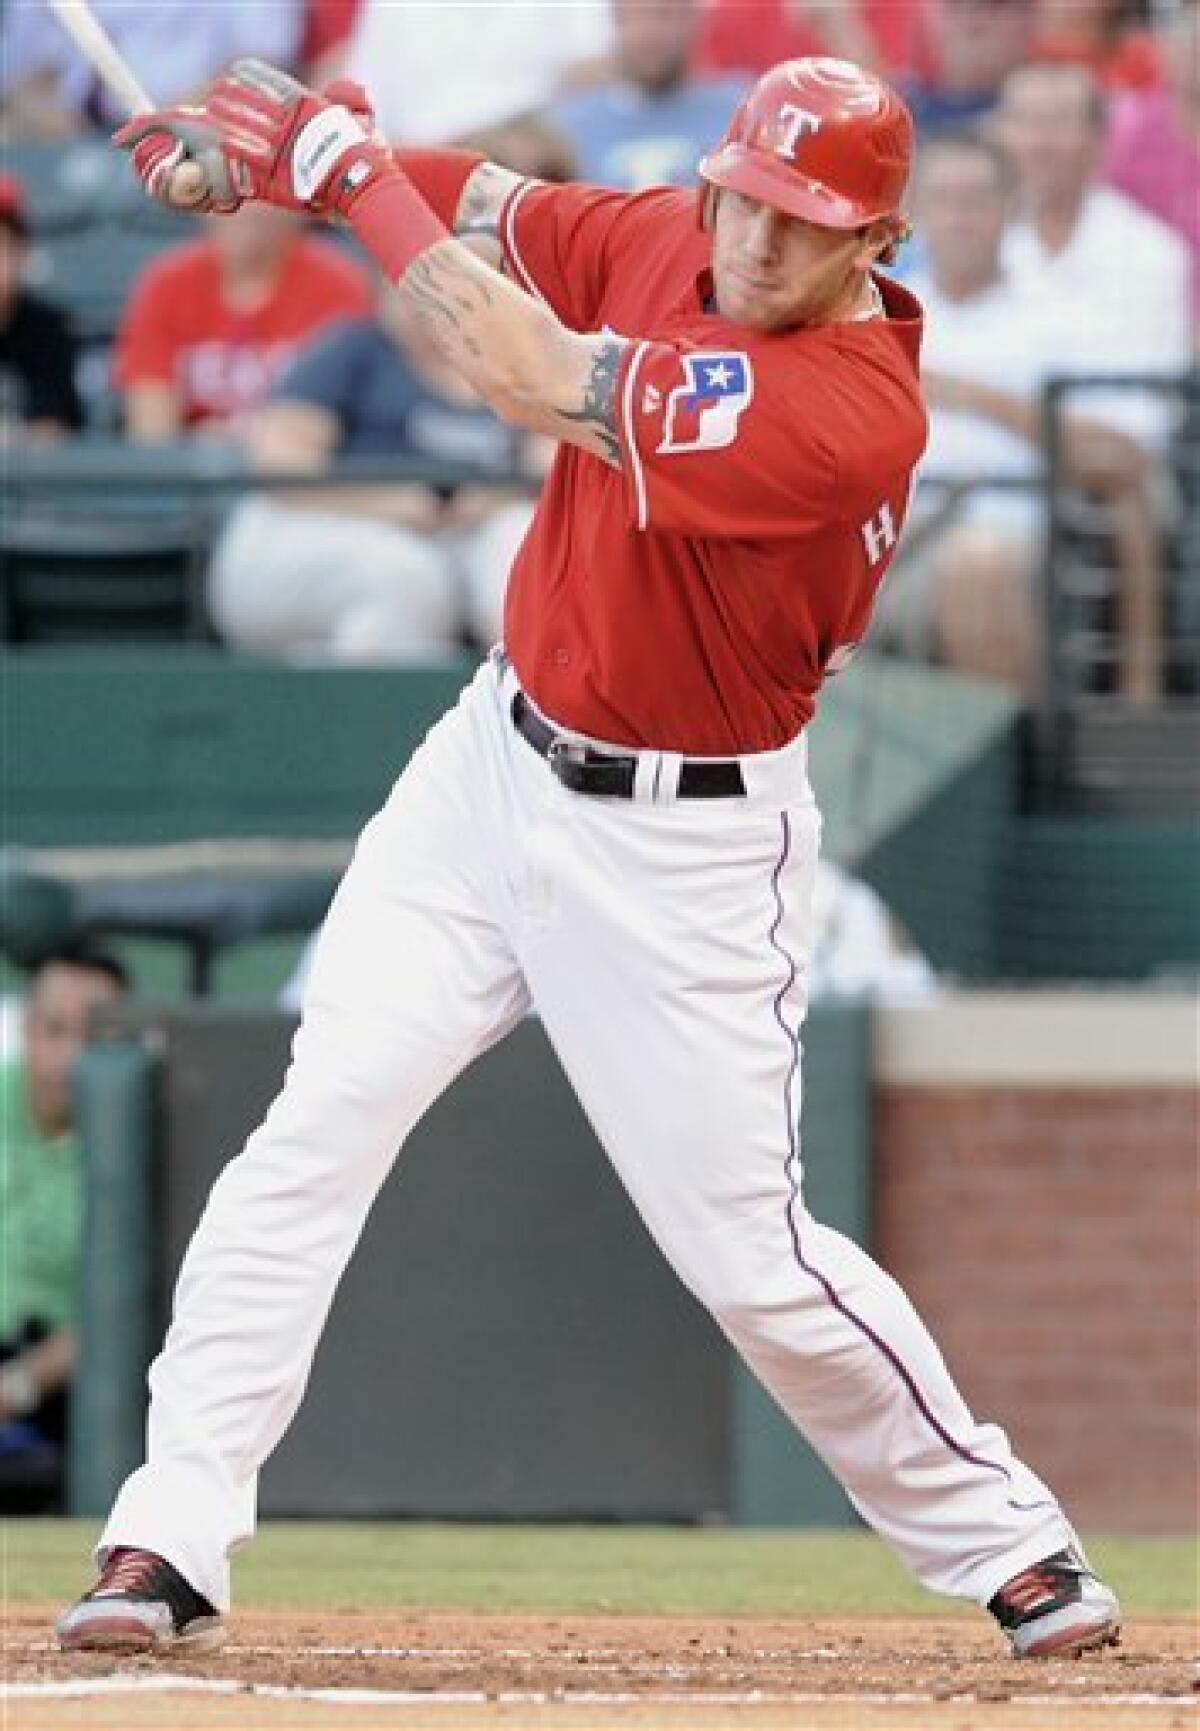 Josh Hamilton headed to left field, middle of lineup with Texas